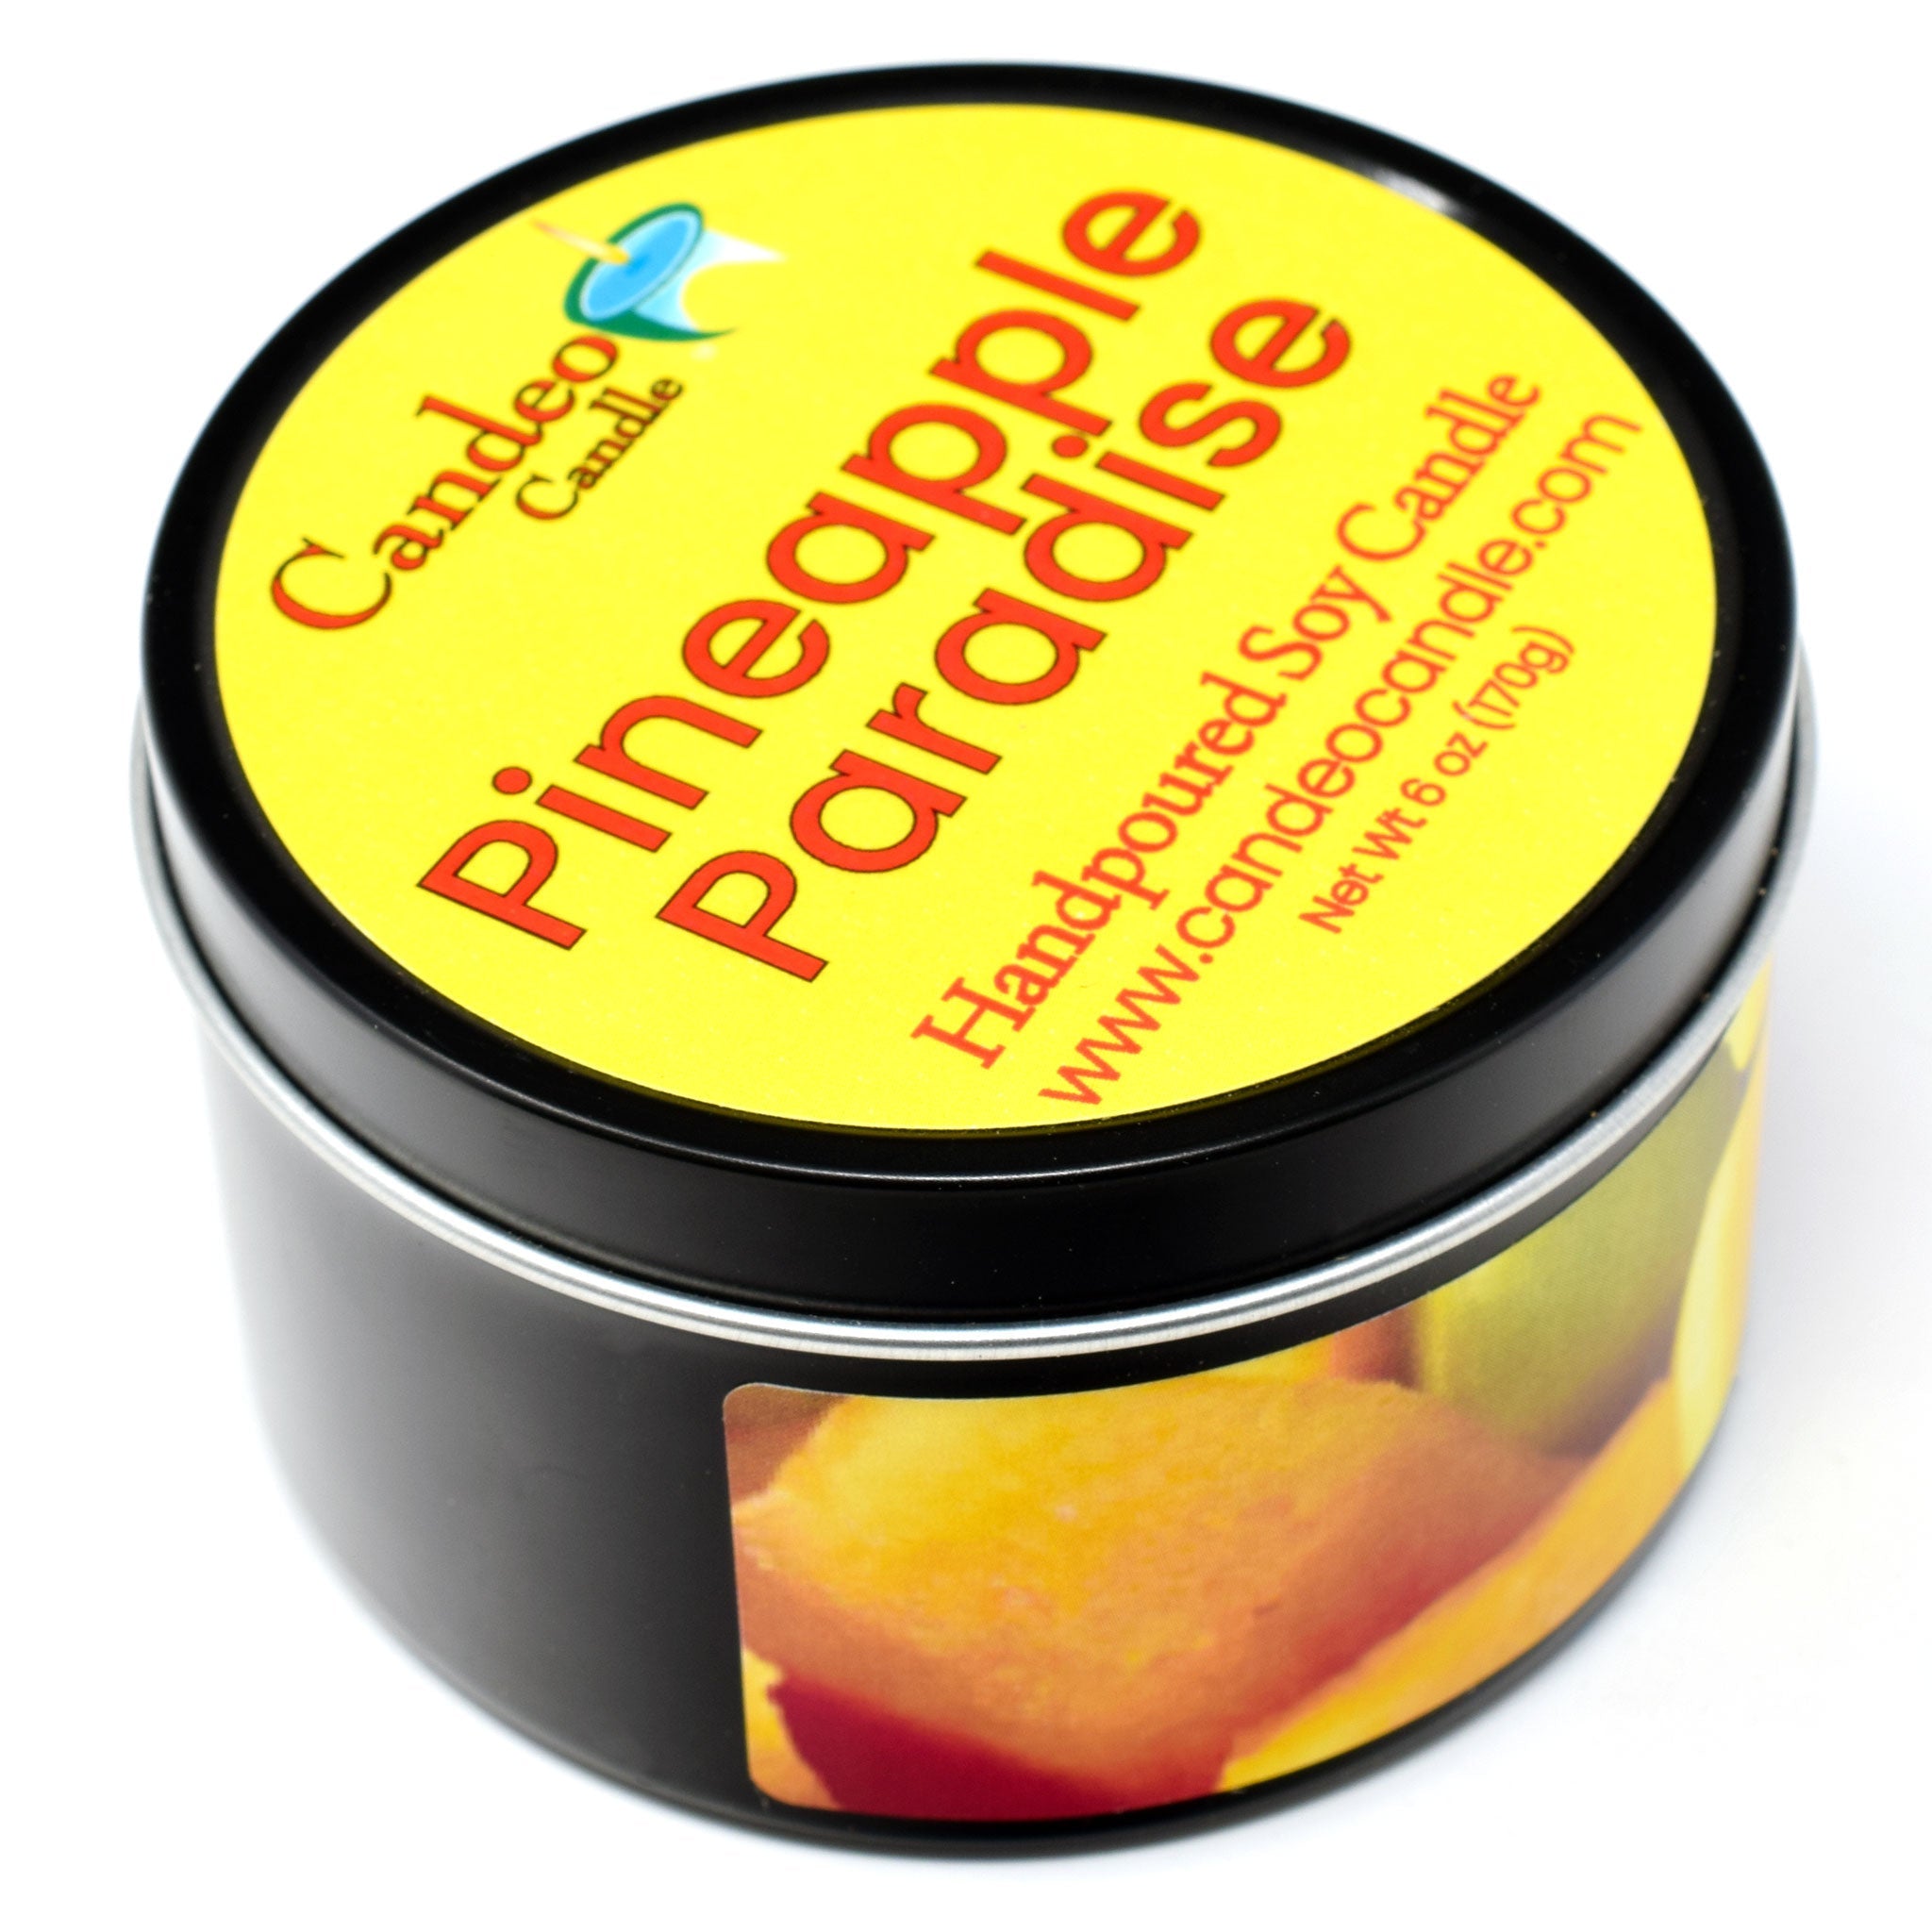 Pineapple Paradise, 6oz Soy Candle Tin - Candeo Candle